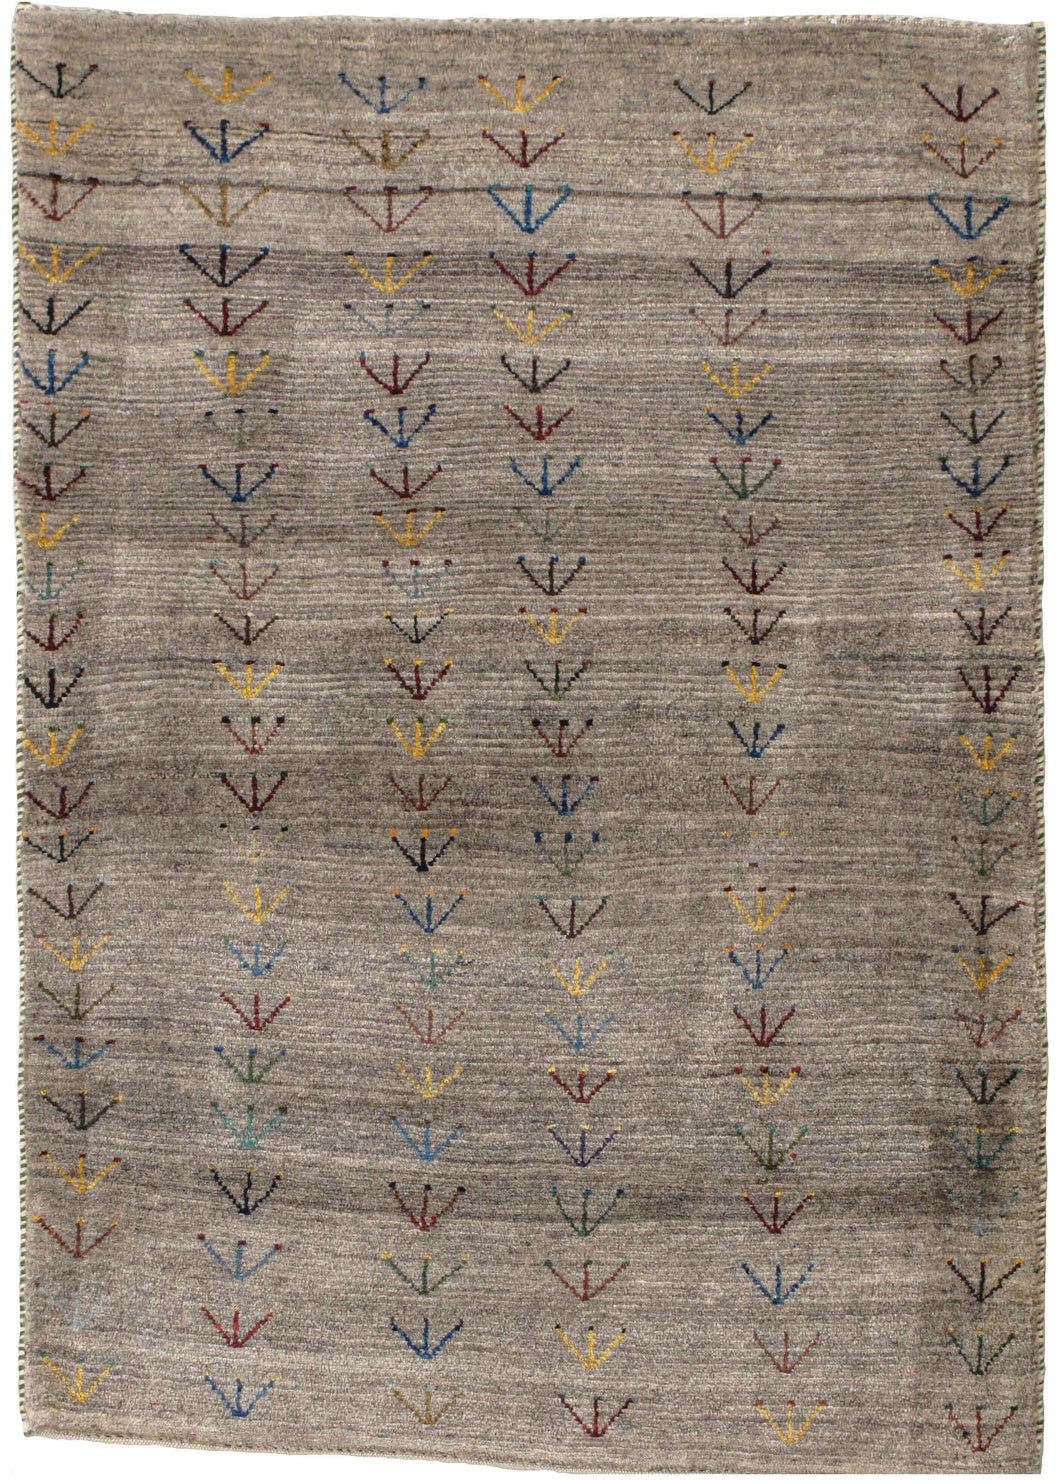 This Small Plants Grey Gabbeh features columns of vegetal-like shapes in various reds, blues, yellows, greens, and browns on a variegated gray ground. The columns are simply inconsistently drawn giving the appearance of a field of flowers swaying in the wind. The pile is densely woven, making this a plush rug.